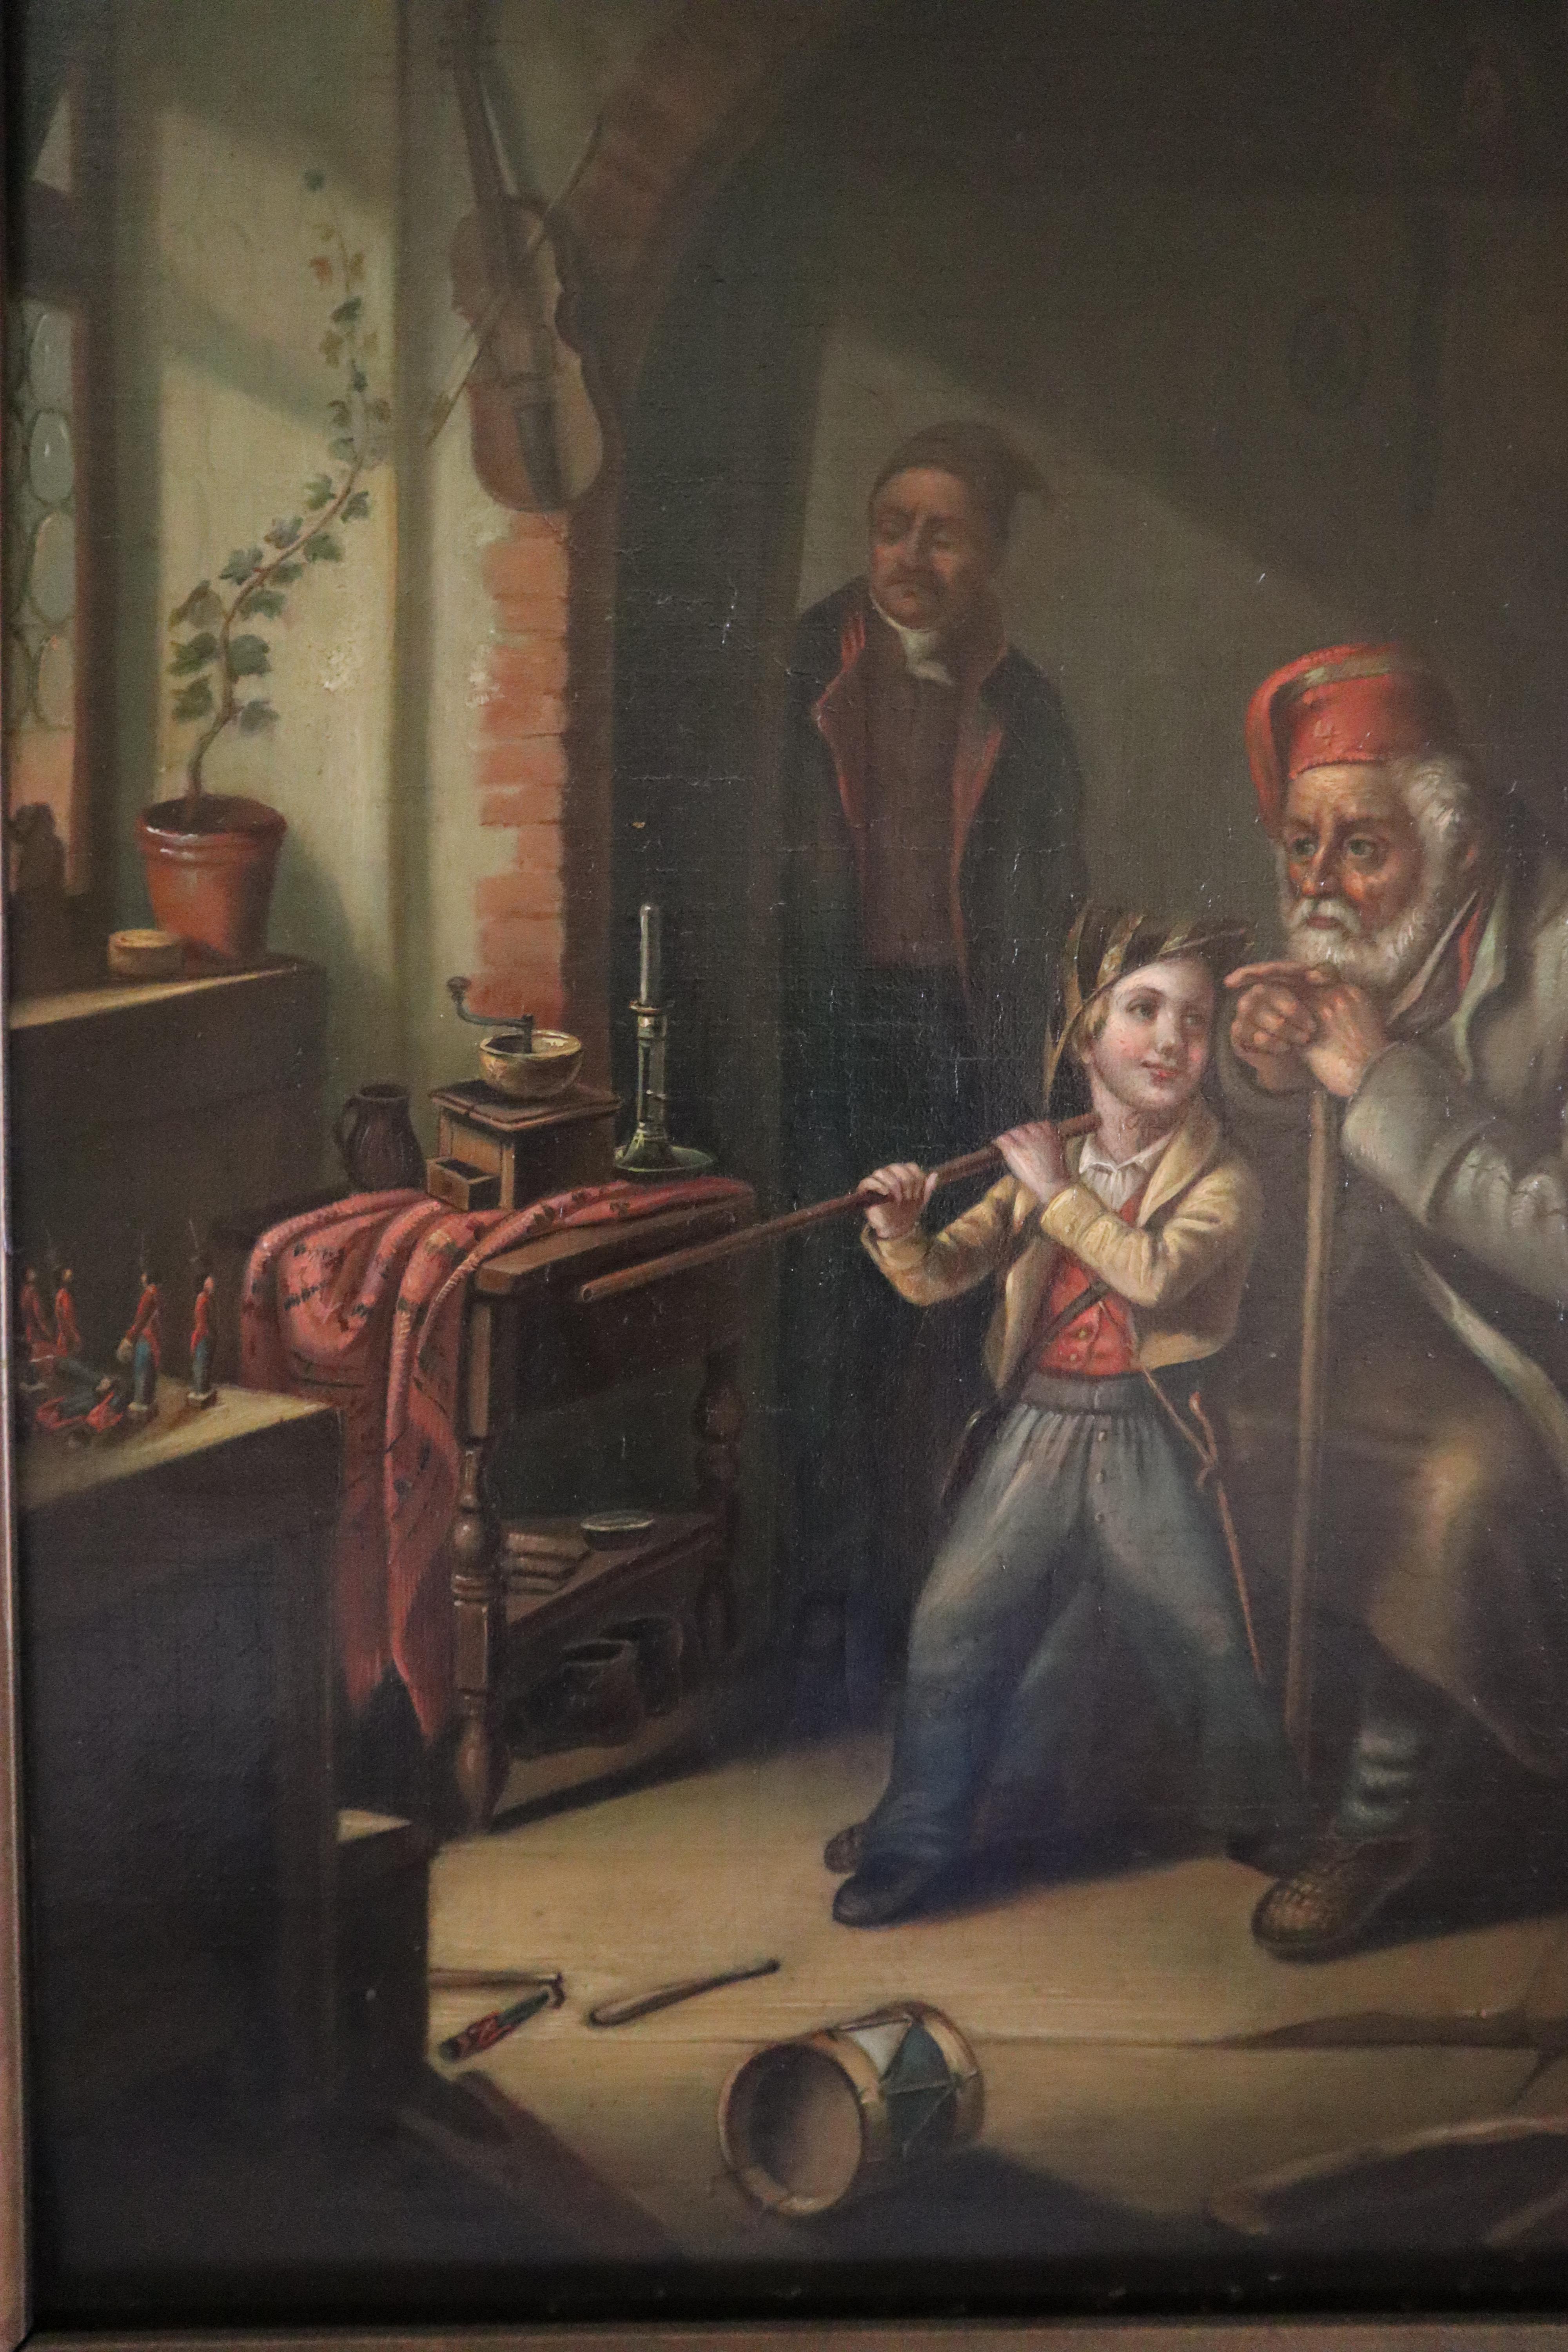 Three Stages in the Life of a Soldier 19th century INVENTORY CLEARANCE SALE - Brown Figurative Painting by Unknown